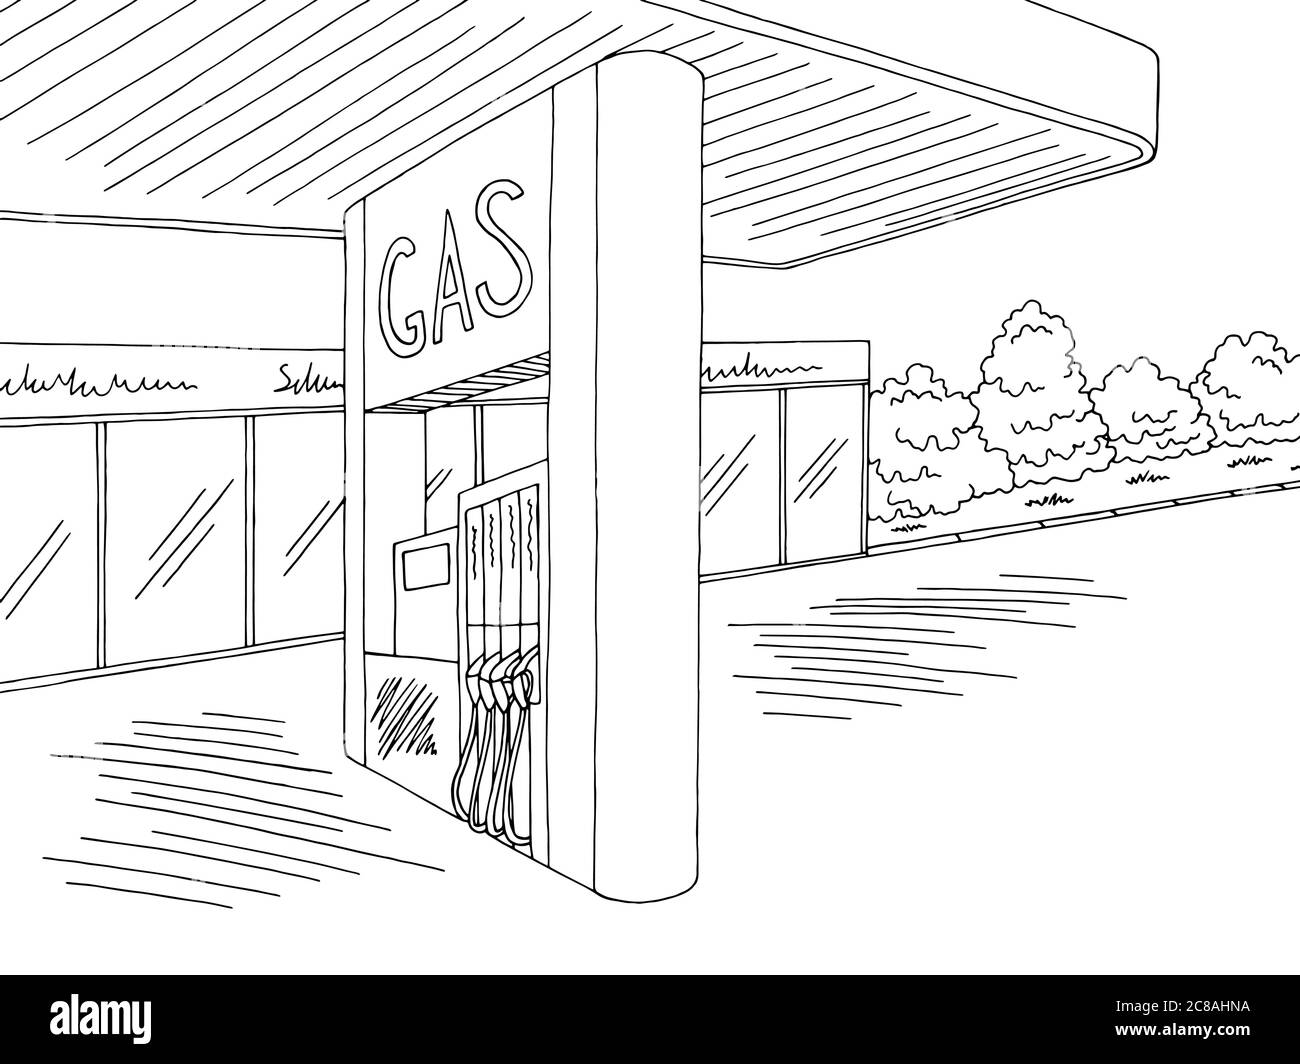 Gas station exterior graphic black white sketch illustration vector Stock Vector